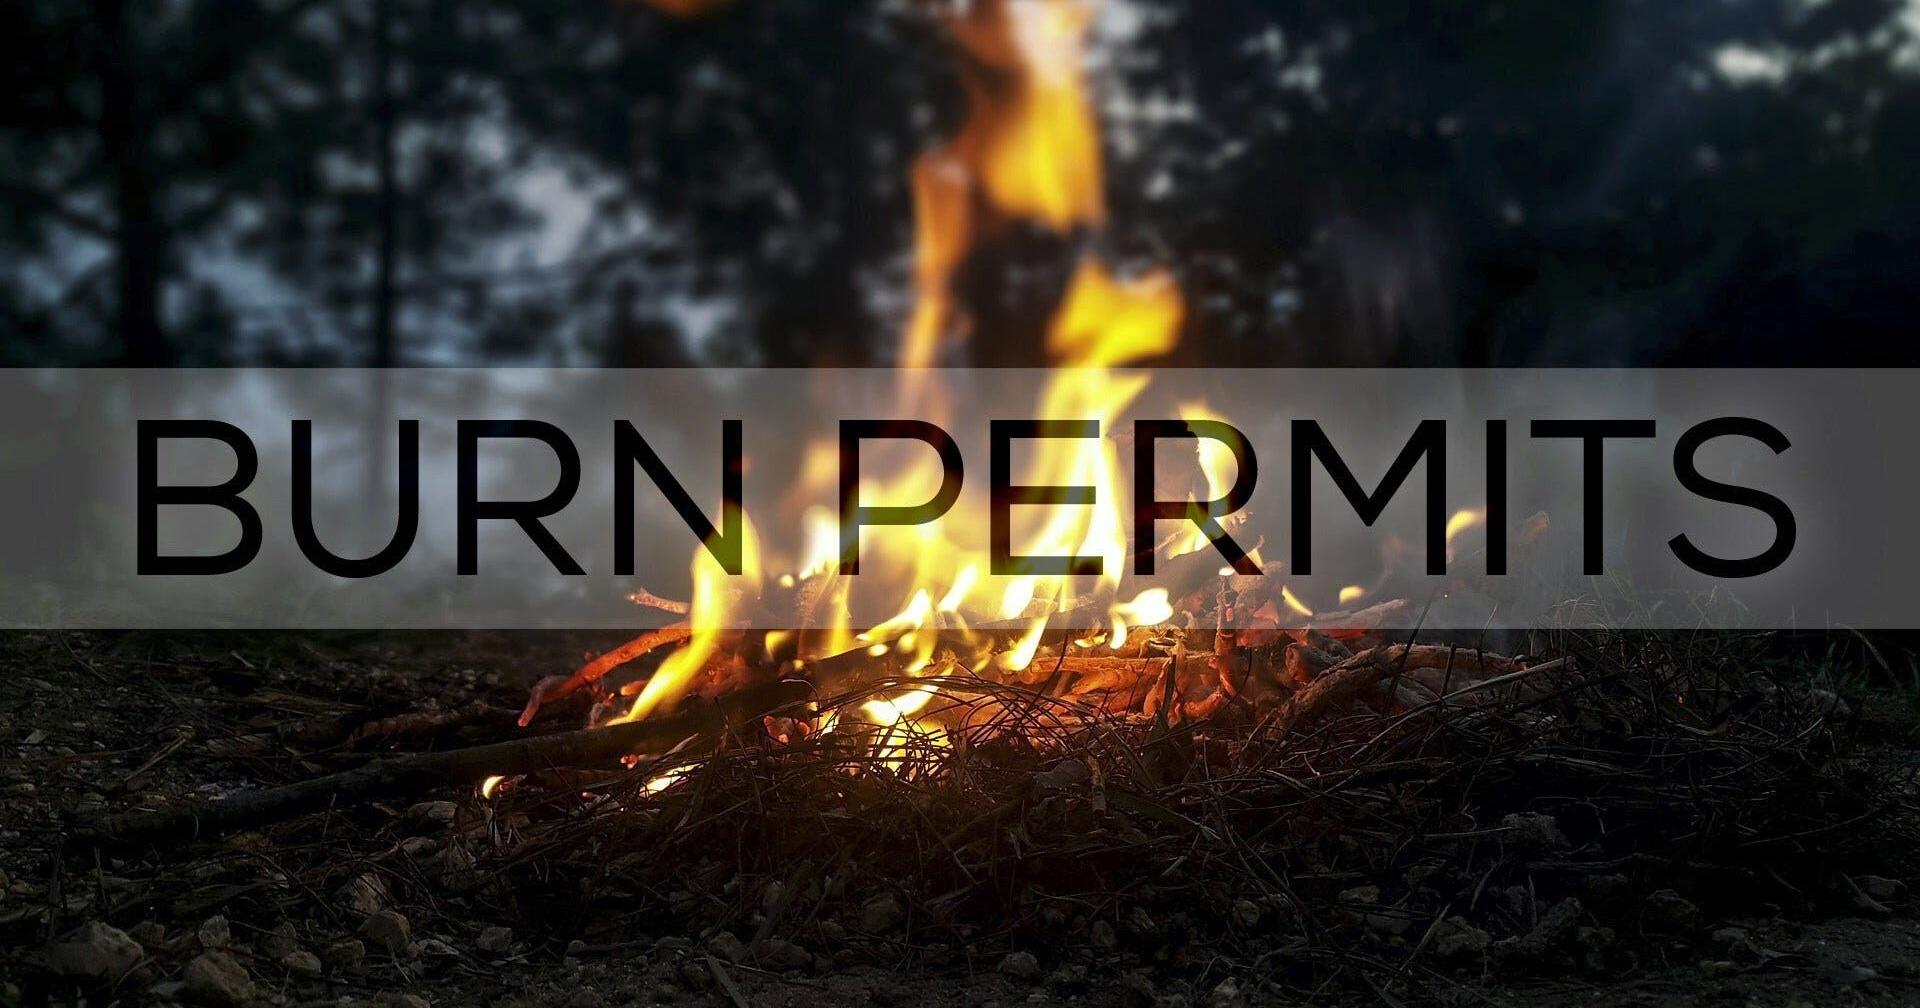 Burn permits required in Tennessee through May 15